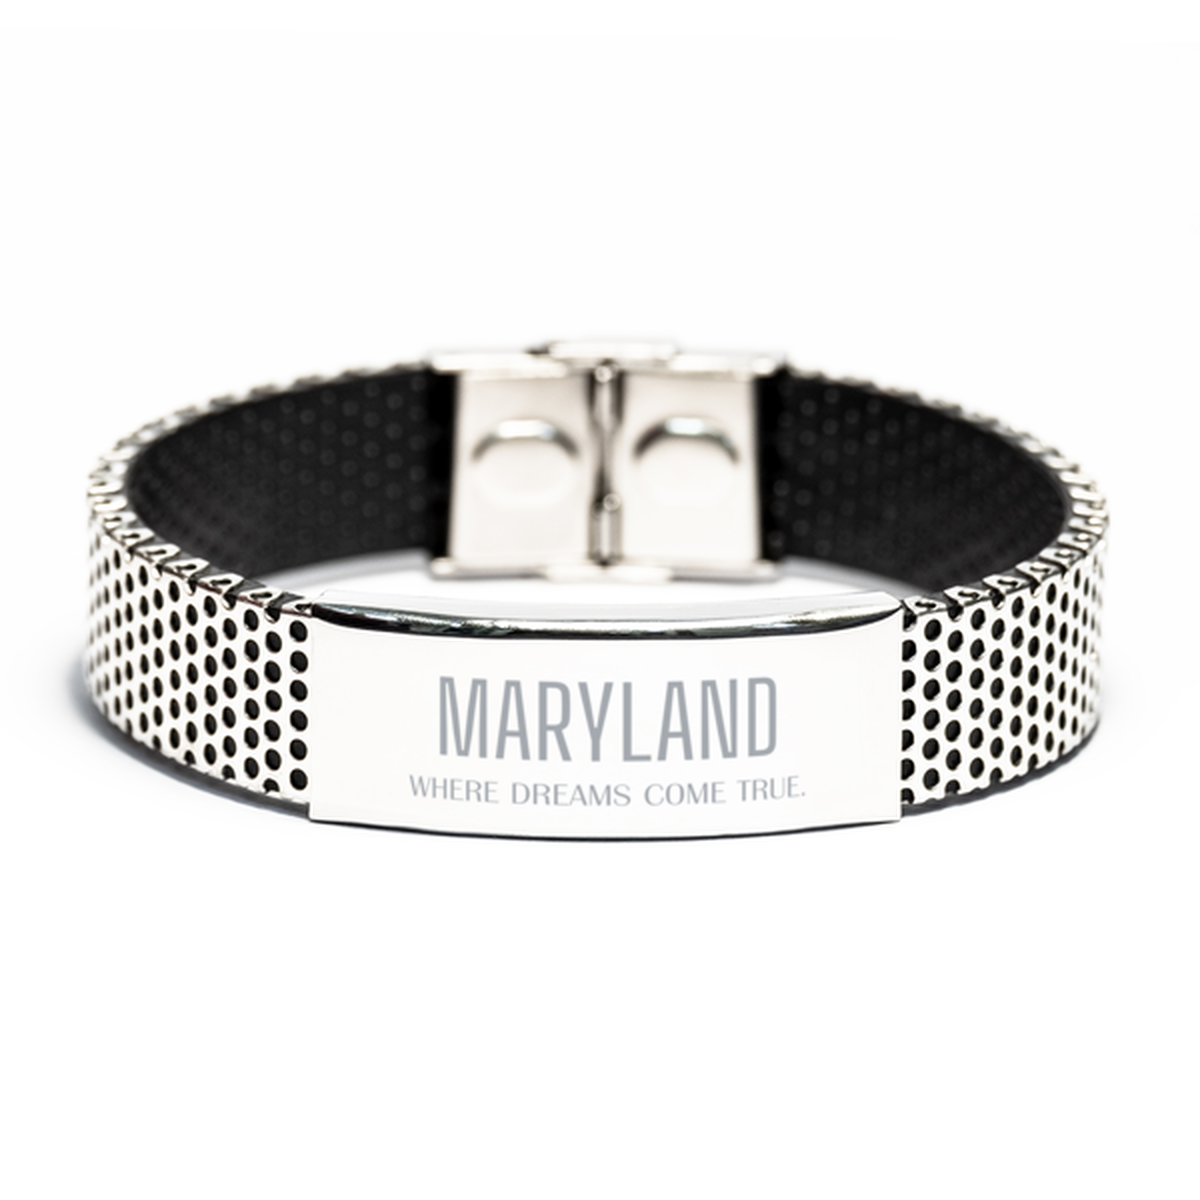 Love Maryland State Stainless Steel Bracelet, Maryland Where dreams come true, Birthday Inspirational Gifts For Maryland Men, Women, Friends